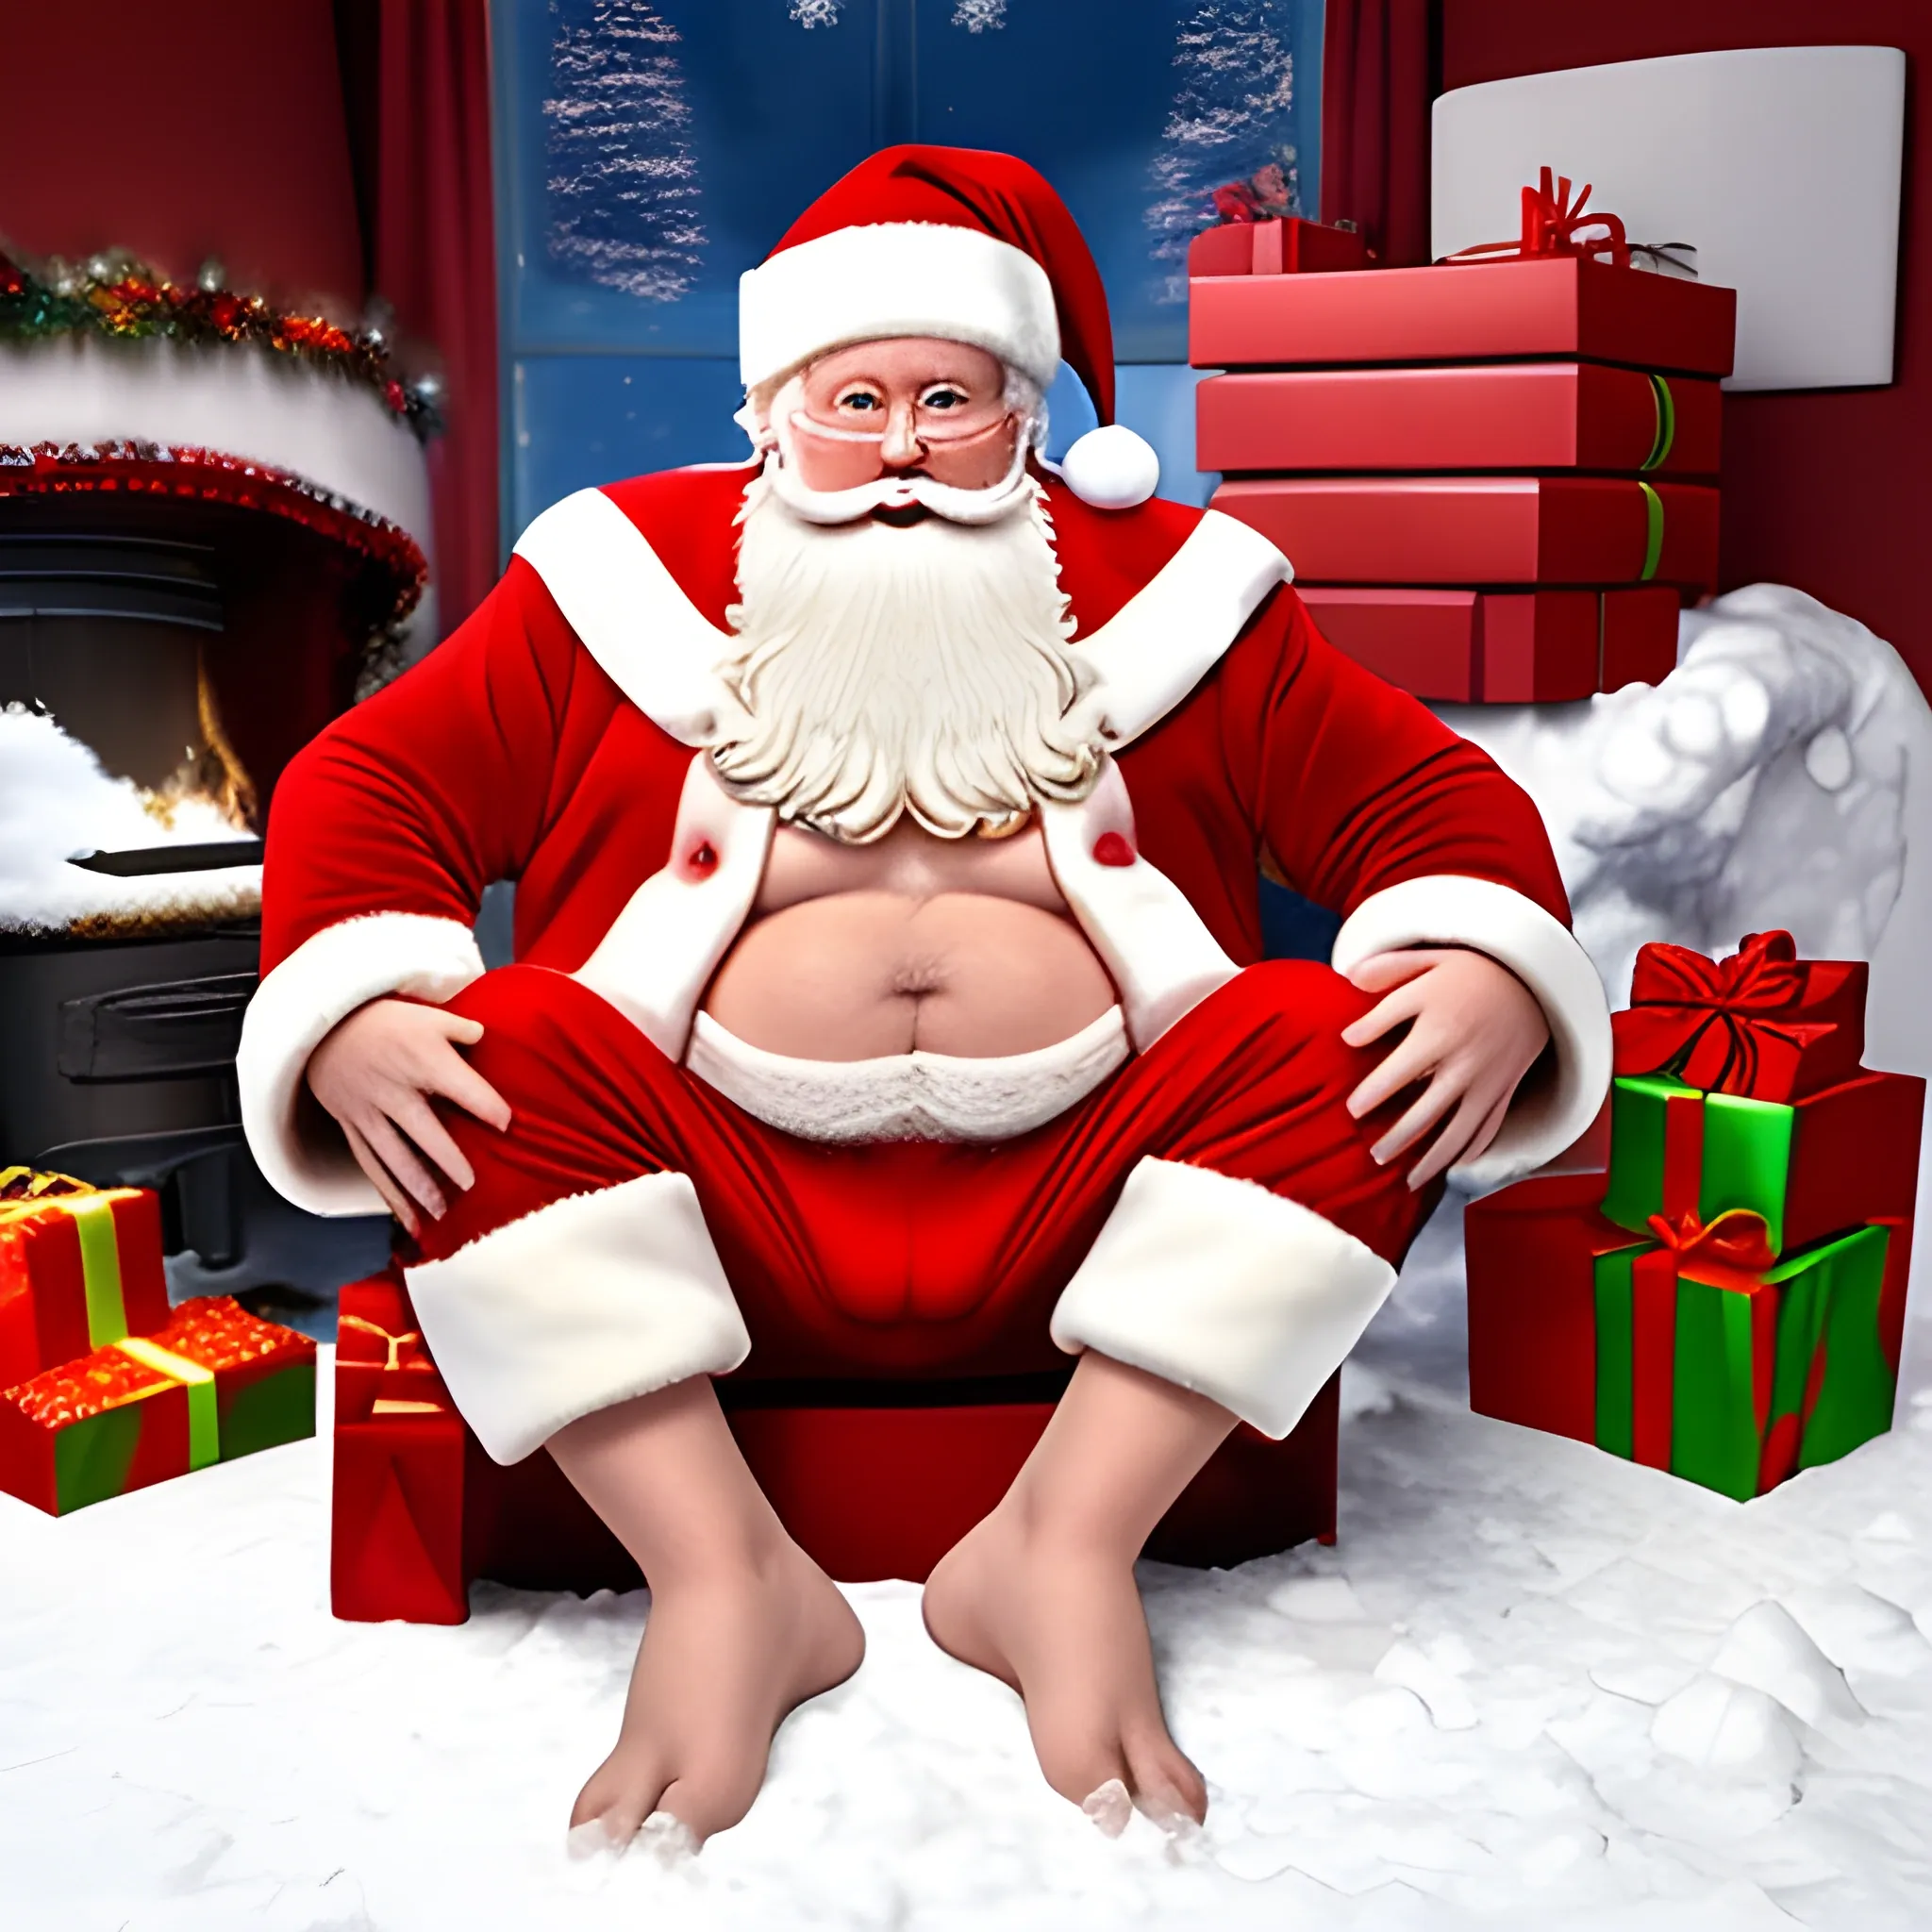 Santa in his underwear sitting on a horny rein Santa Claus naked and in underwear sitting on a horny rein pulling a sleigh full of gifts wrapped in toilet paper in a snowy town